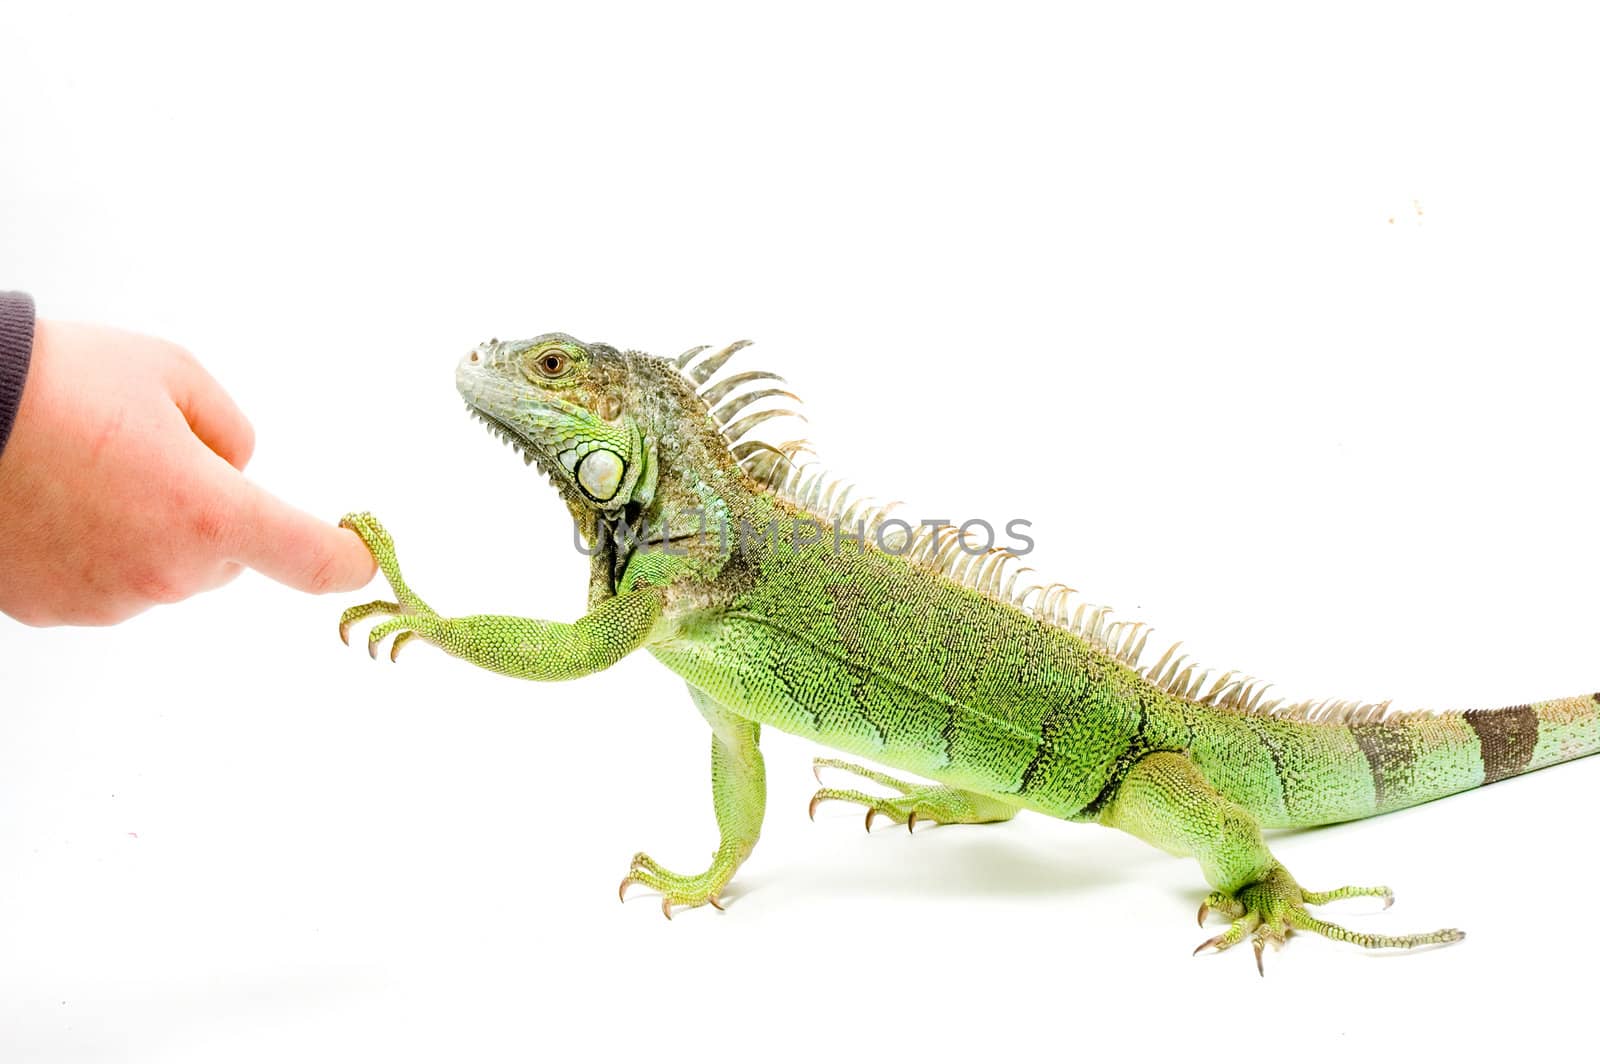 Iguana is shaking hands by ladyminnie